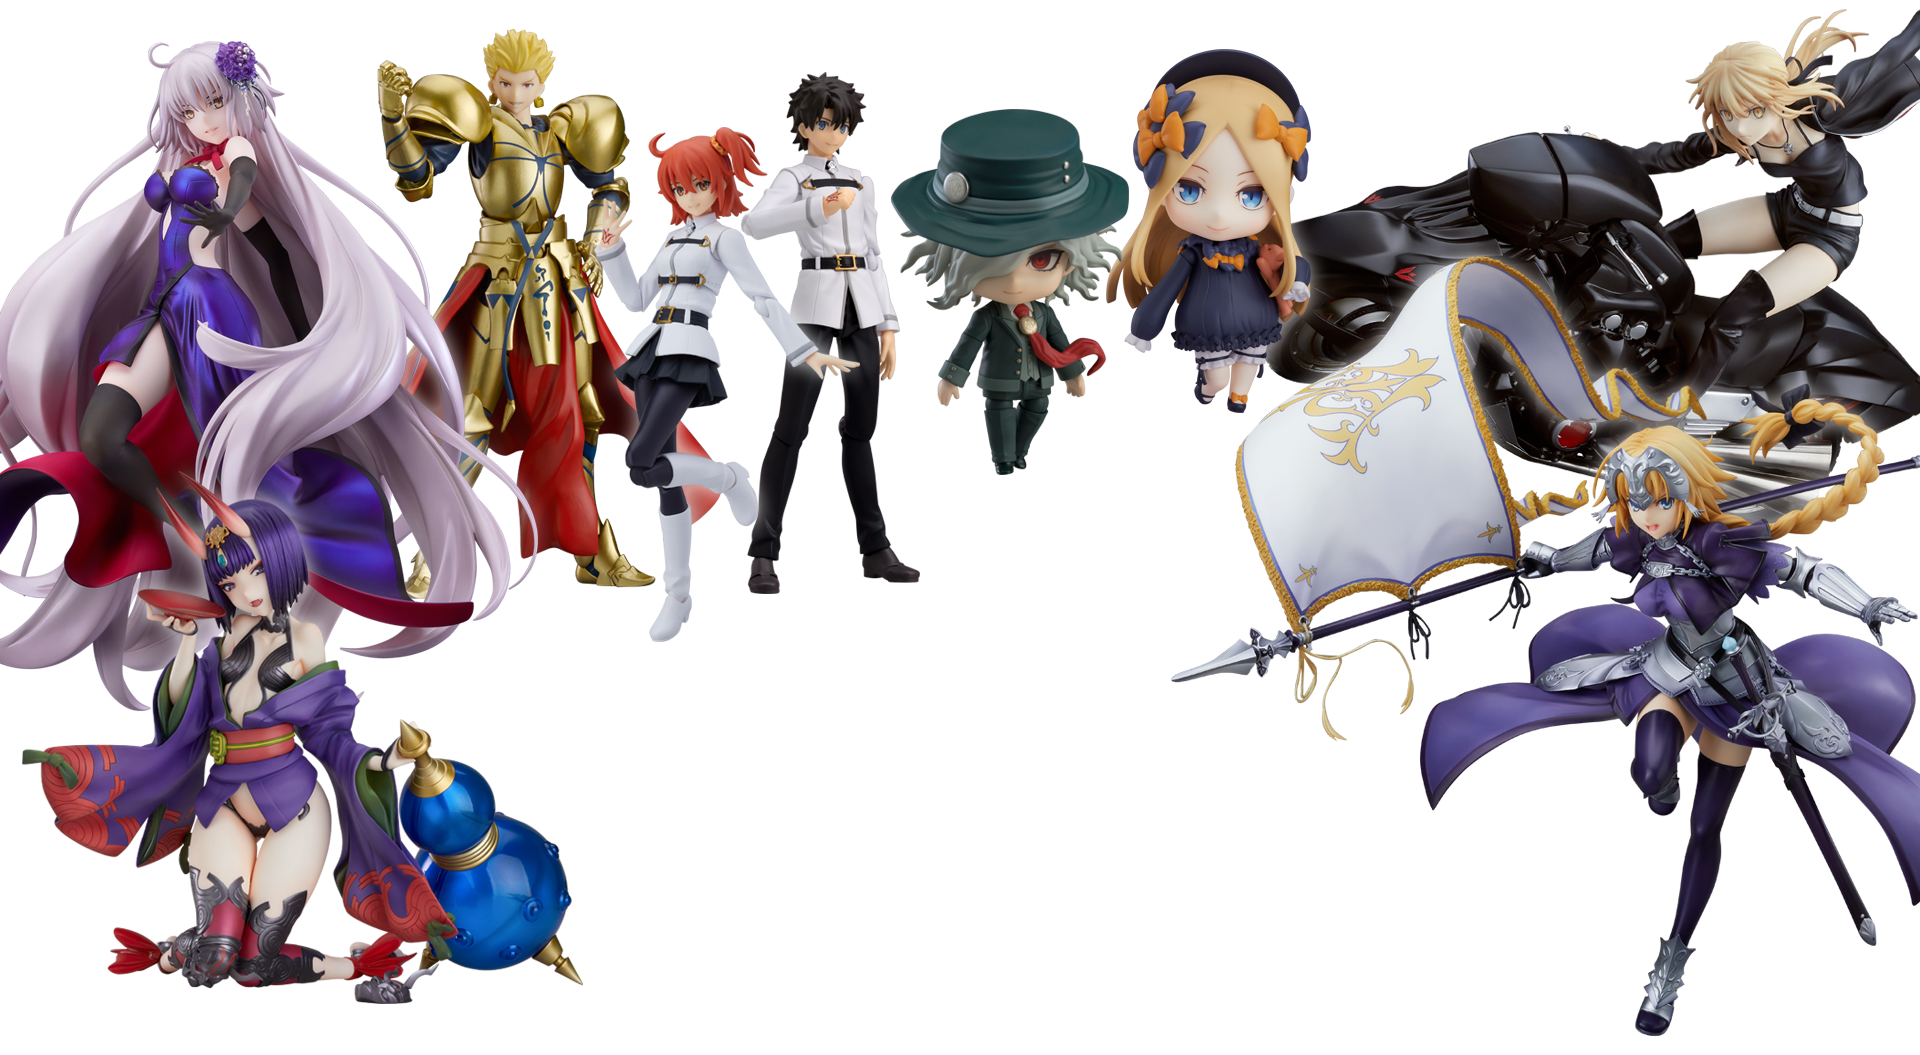 Fate Grand Order Fes 19 4th Anniversary カルデアパーク Type Moon Racing Good Smile Company 出展情報